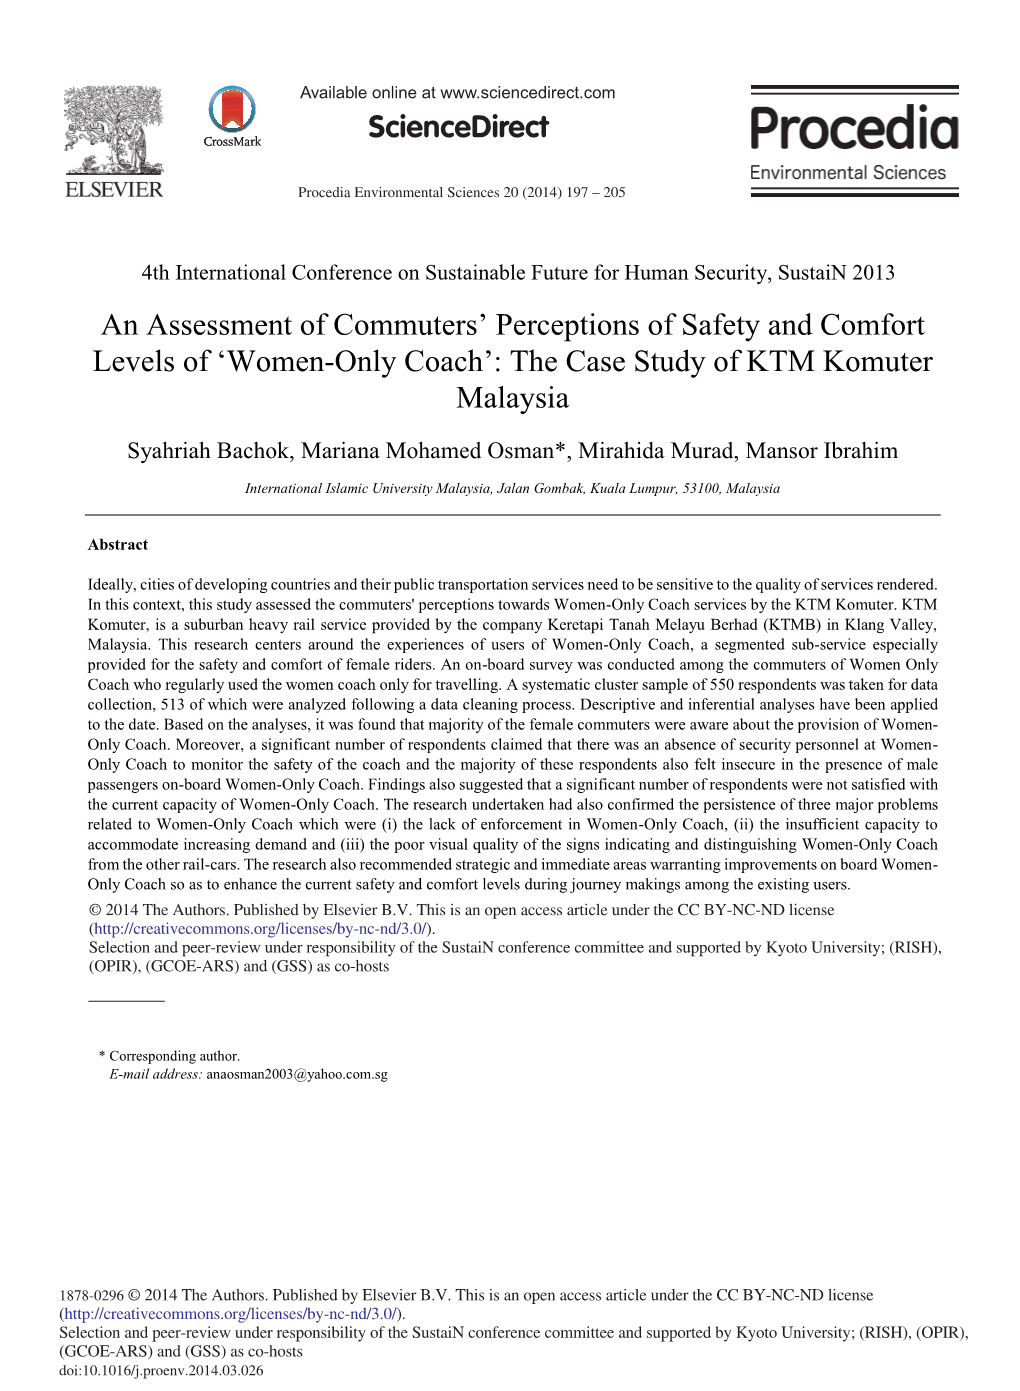 Women-Only Coach’: the Case Study of KTM Komuter Malaysia